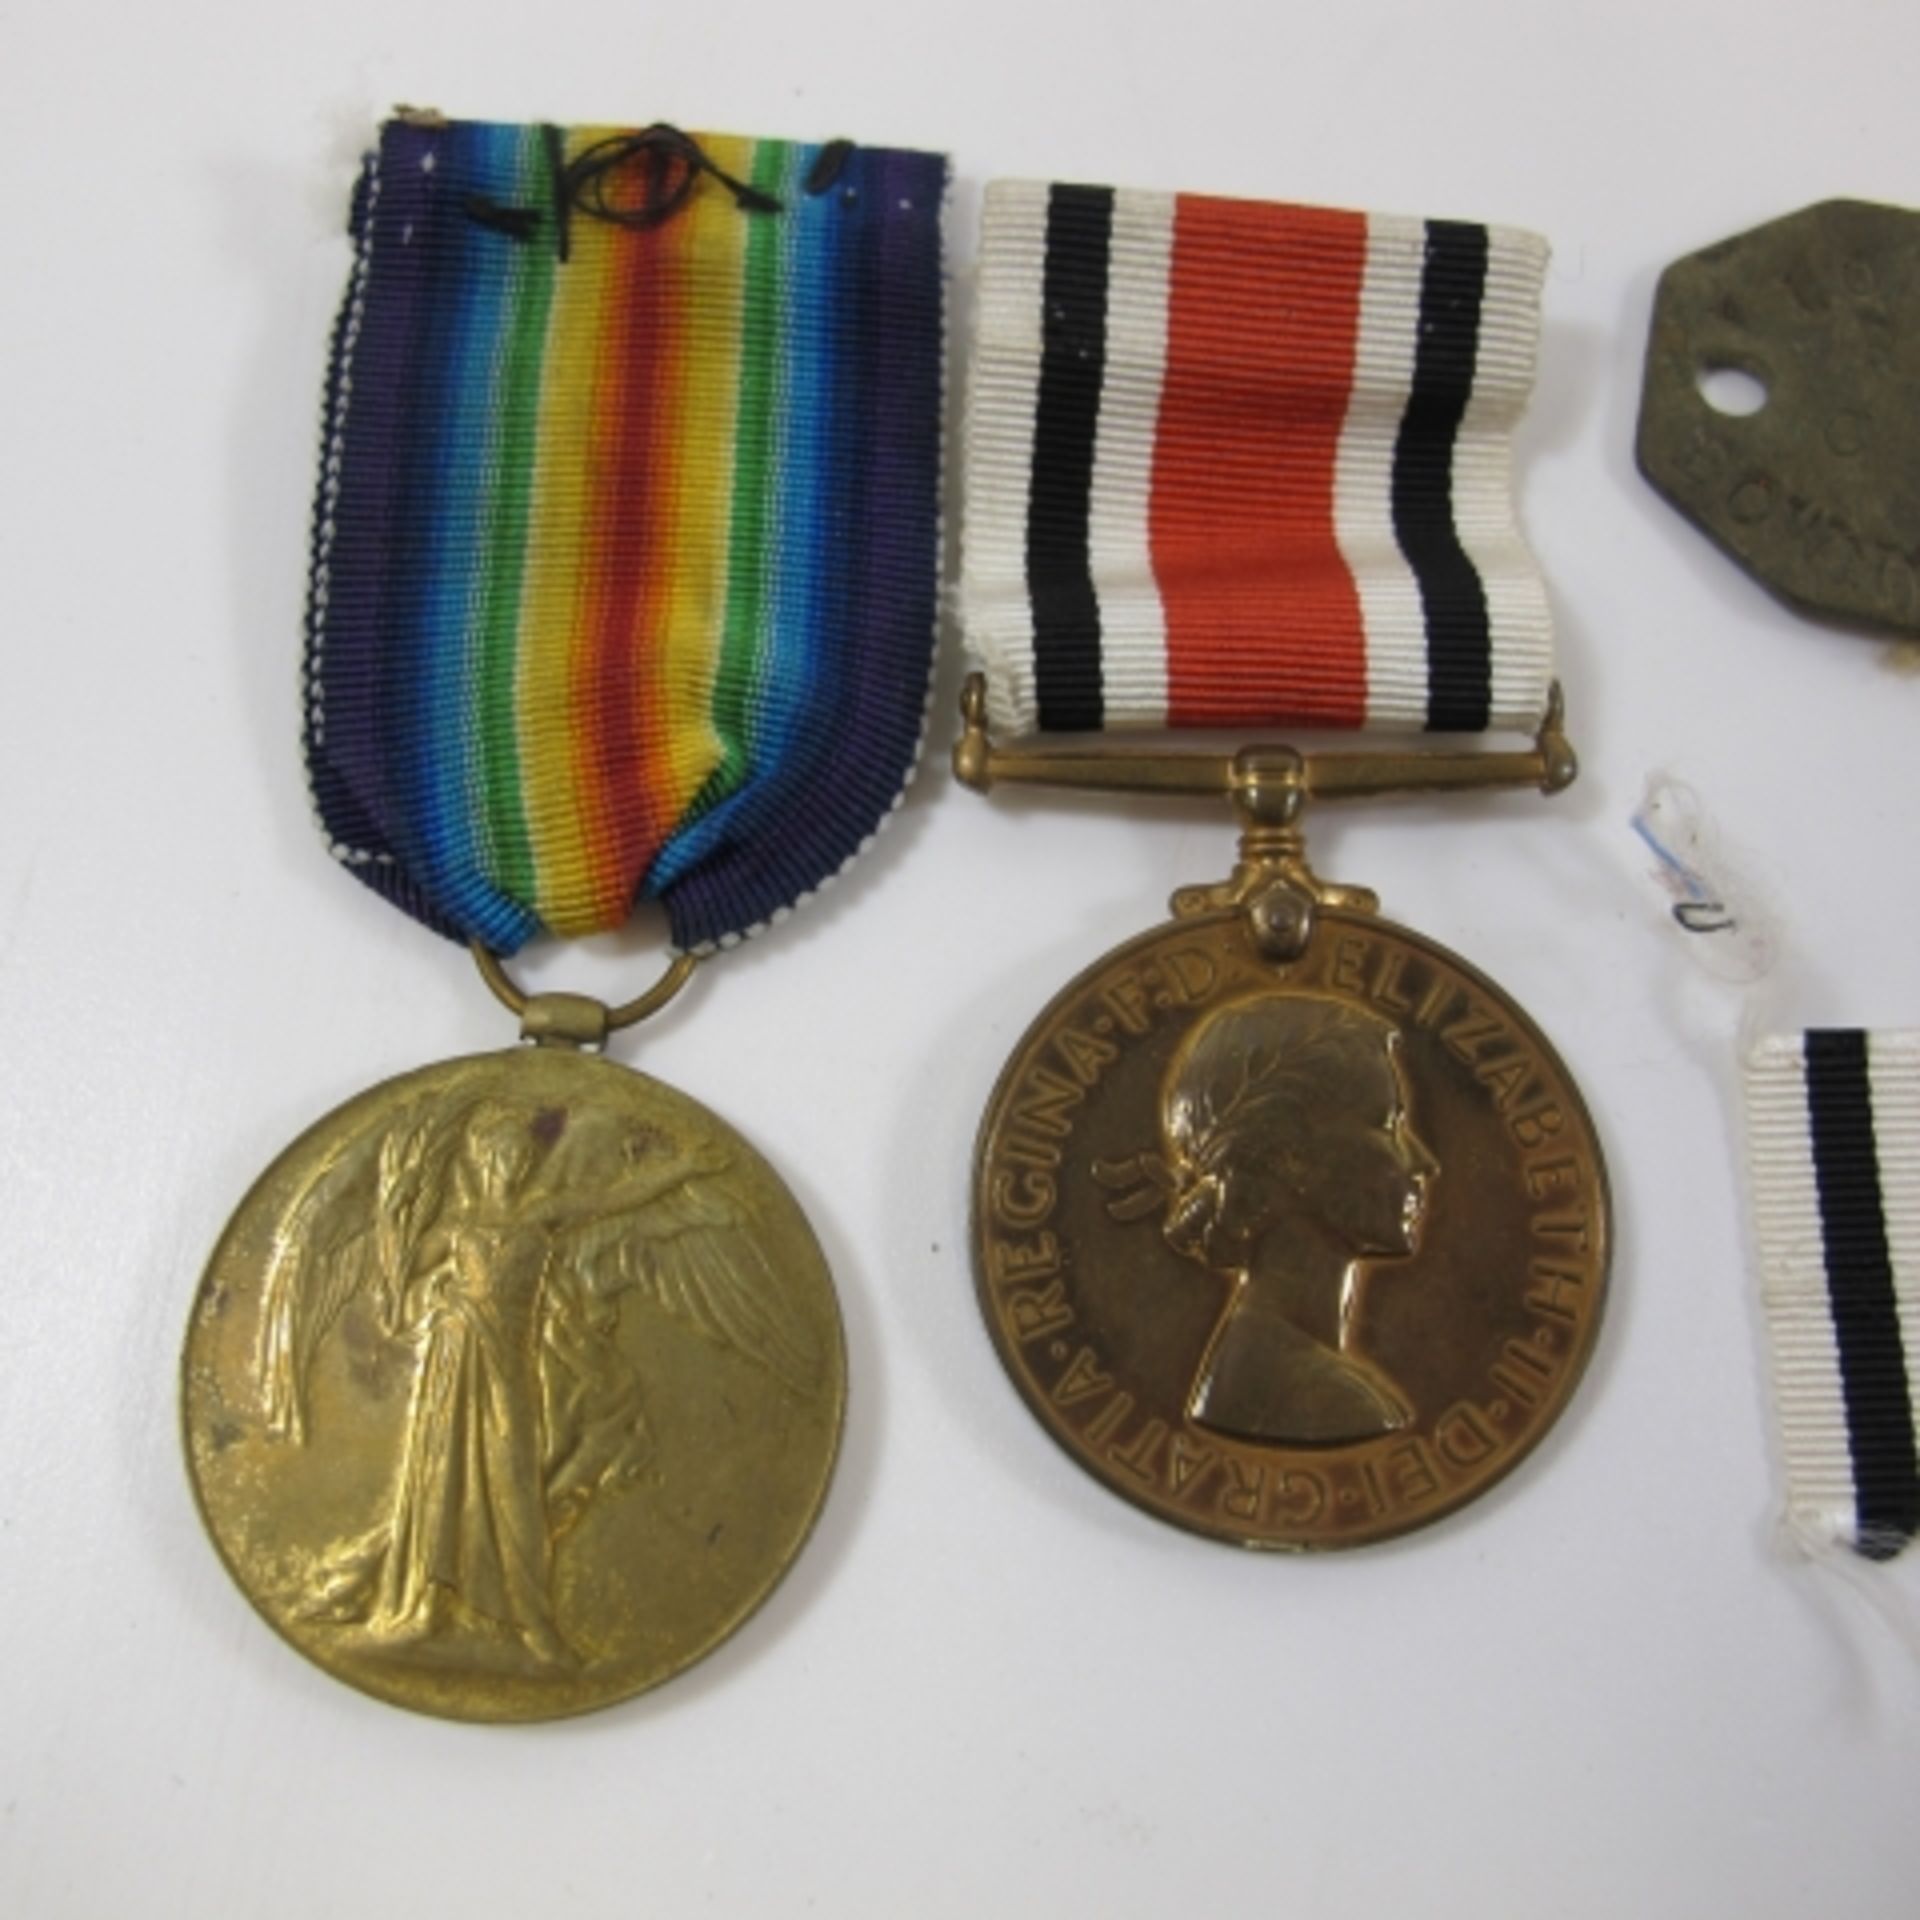 WW1 Victory Medal awarded to 18961 Gnr N. L. Thompson R. A. Elizabeth II Special Constabulary - Image 2 of 5